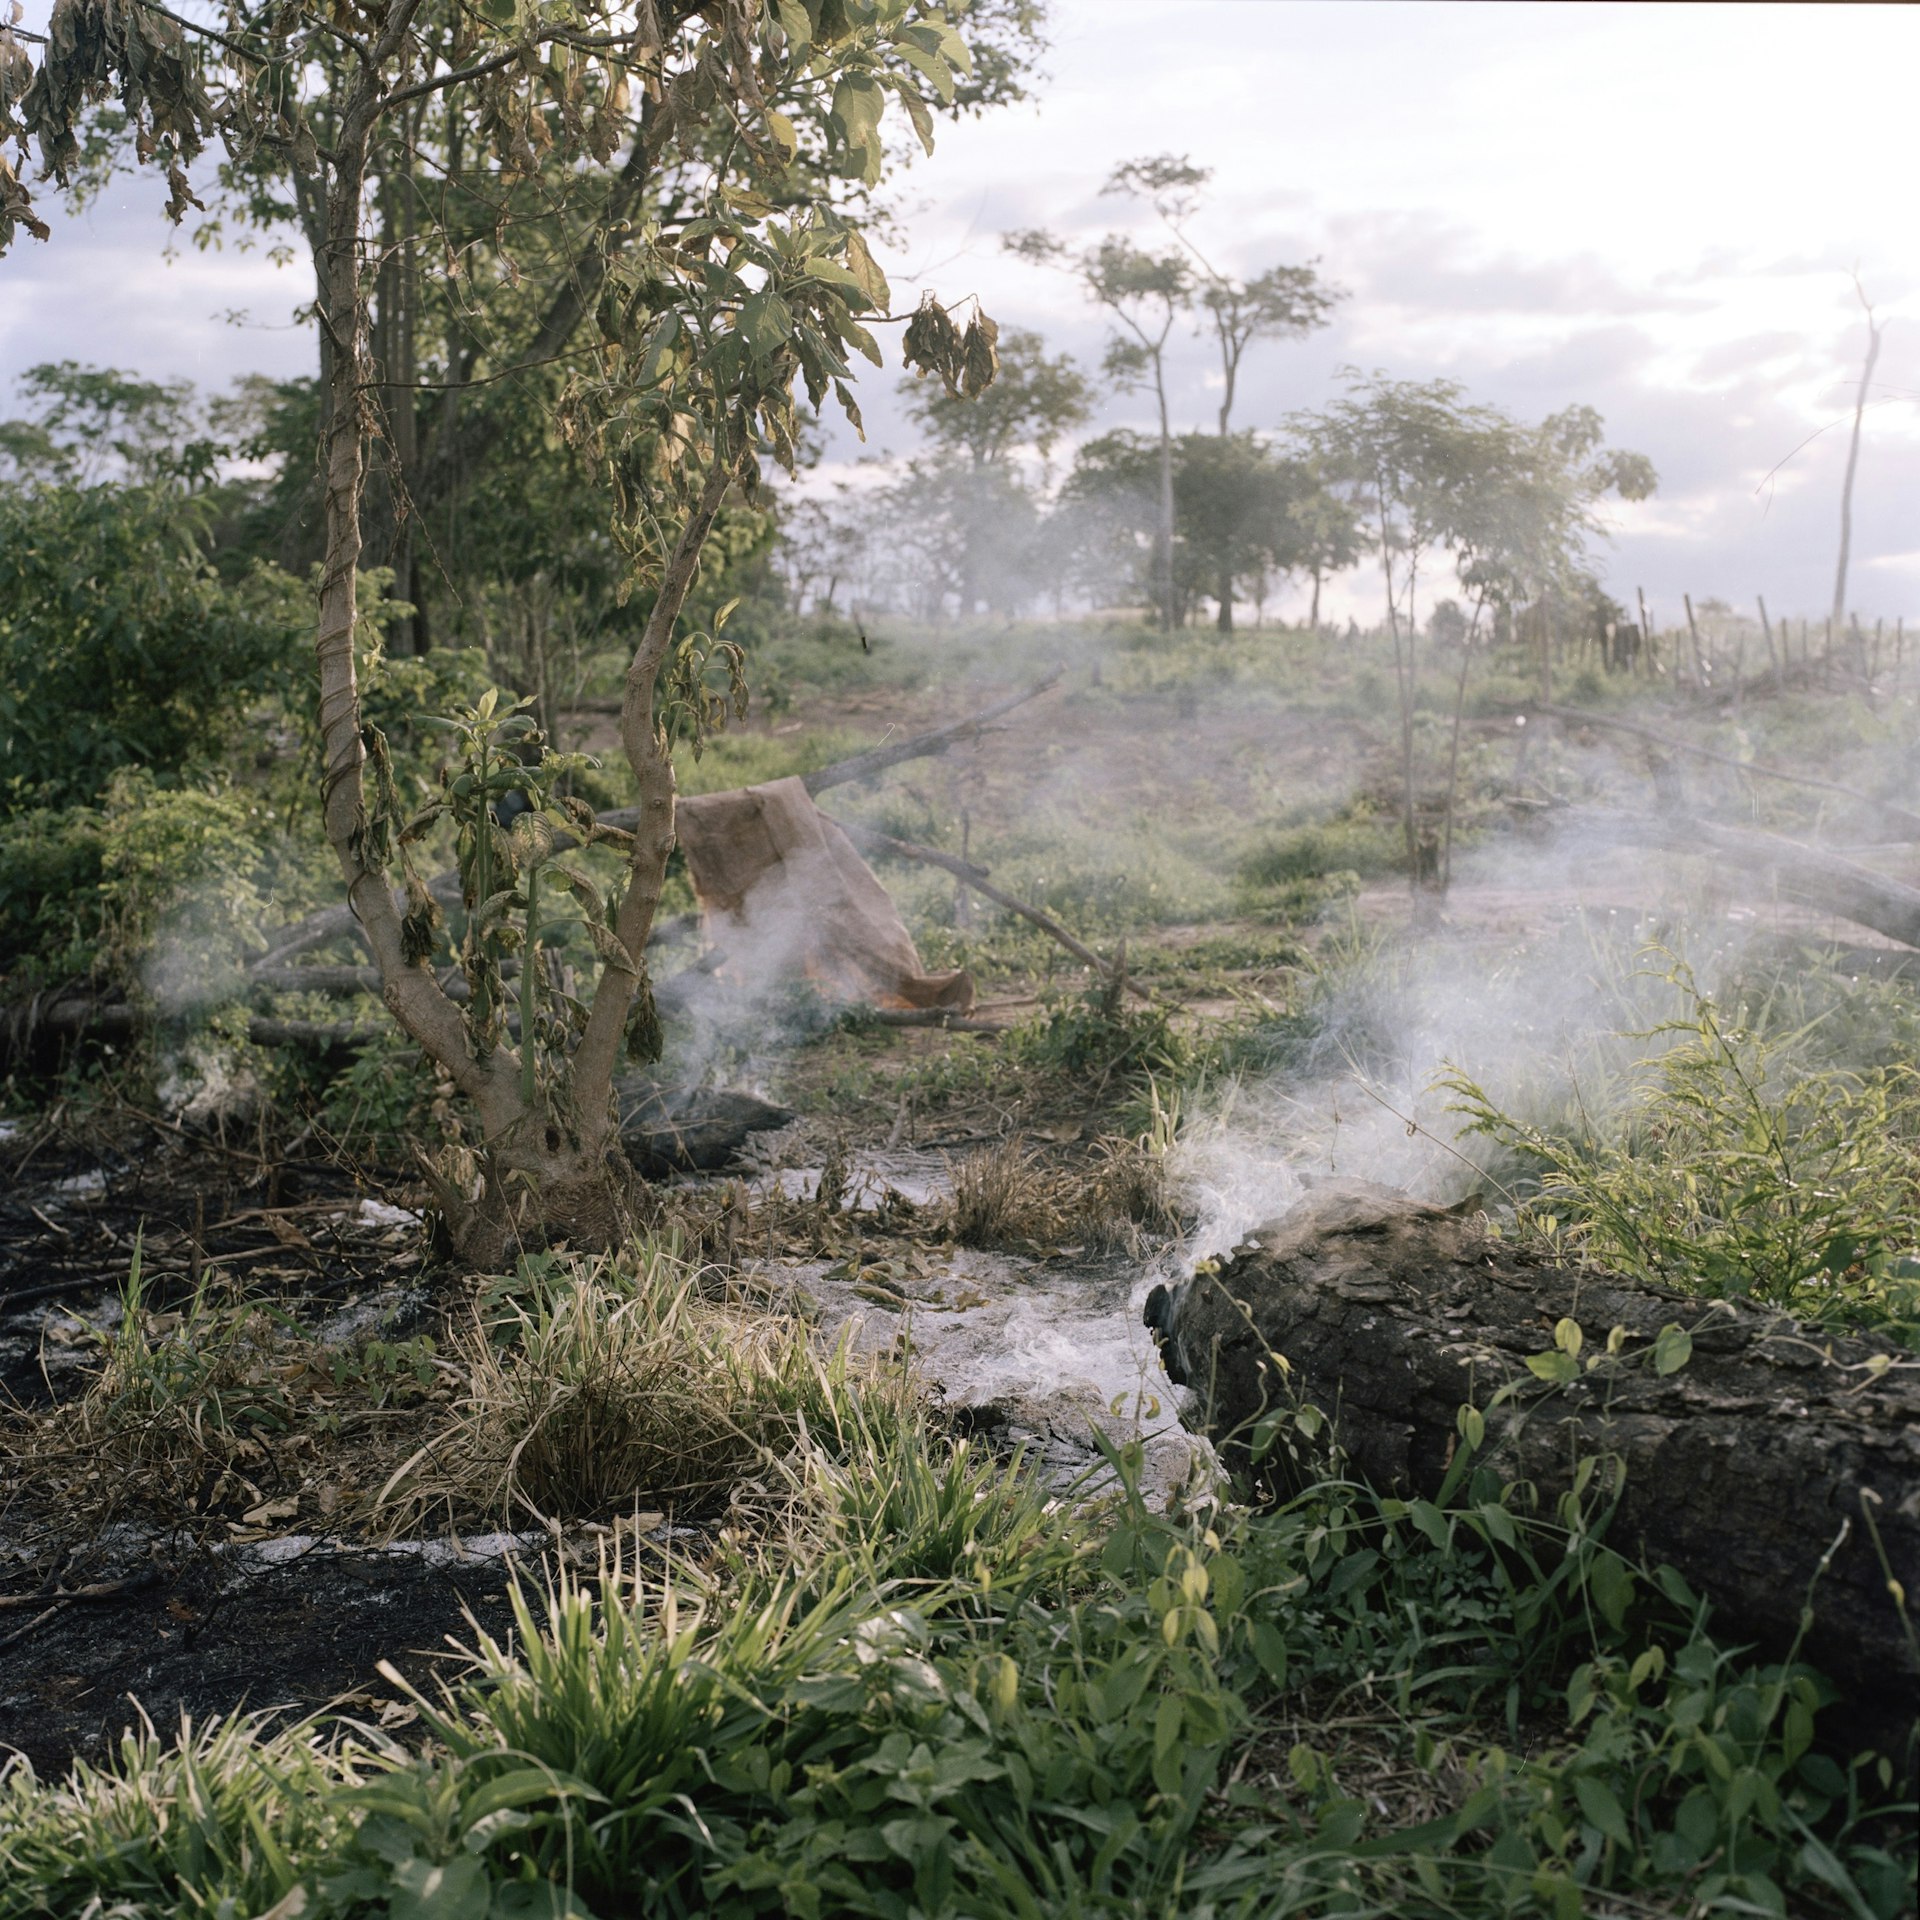 Burned traces of Guayaqui Cuá community after its eviction two days before.